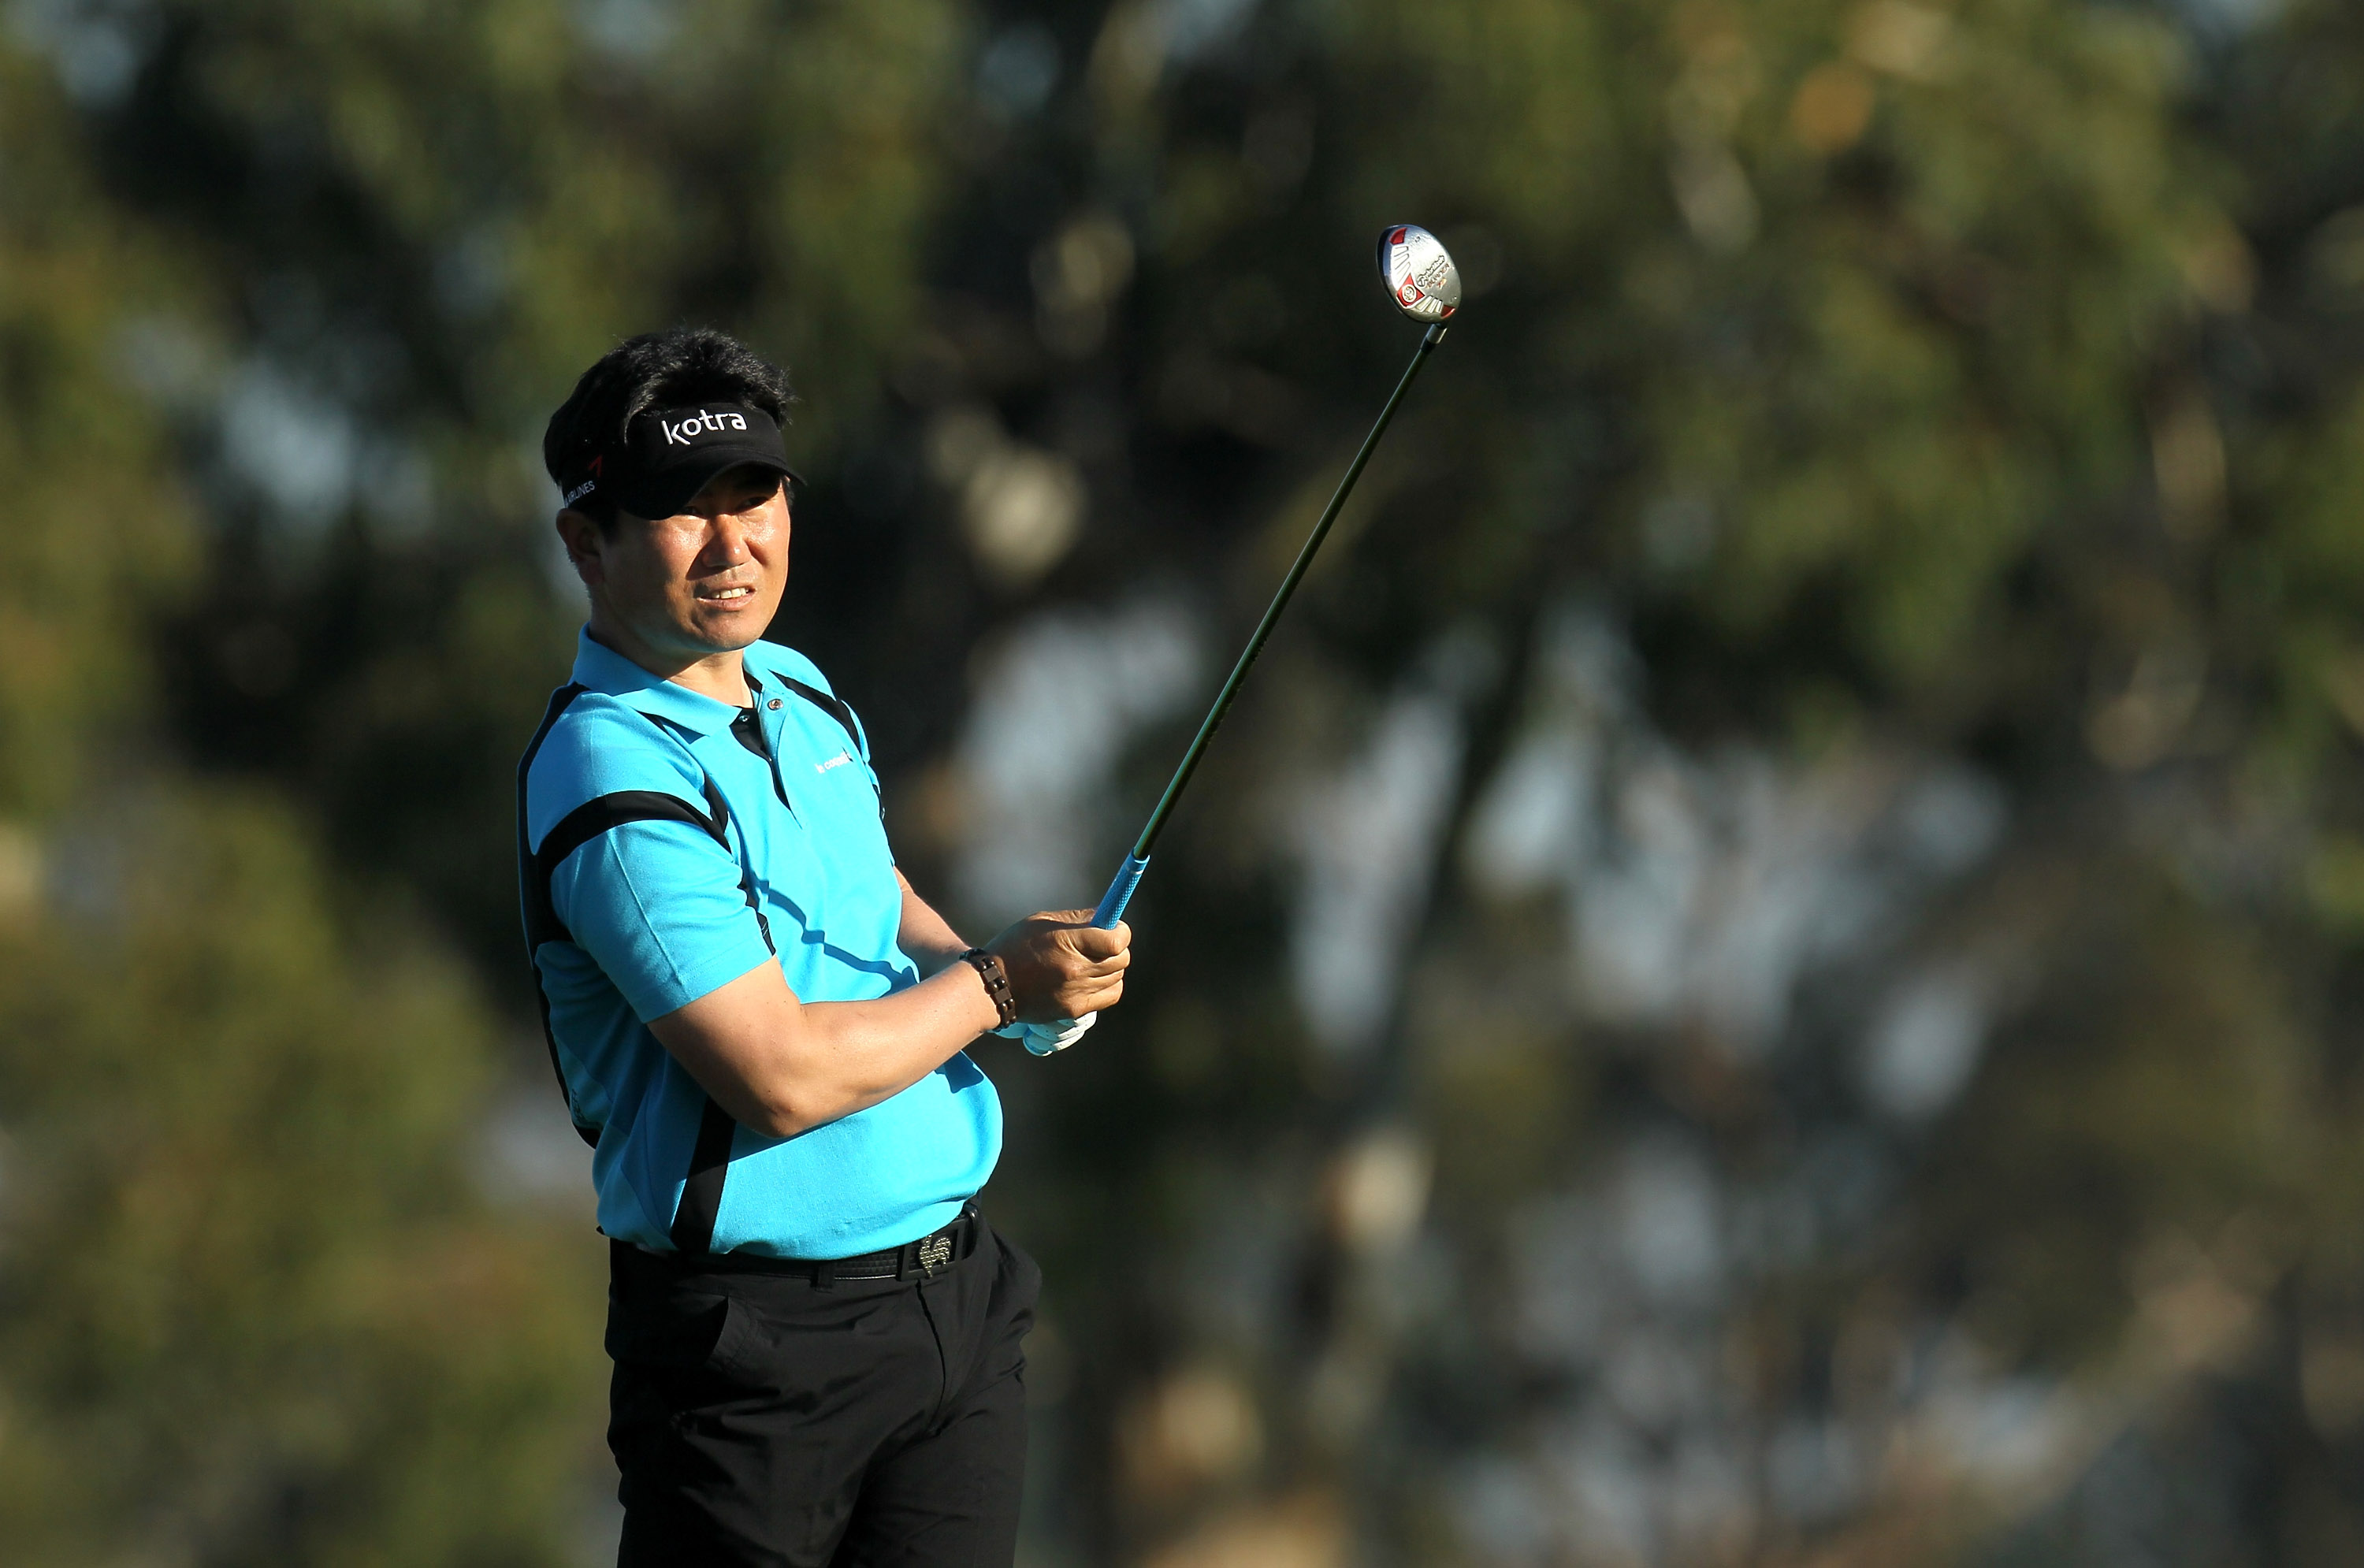 LA JOLLA, CA - JANUARY 29:  Y.E. Yang of South  Korea hits his tee shot on the second hole during round three of the Farmers Insurance Open at Torrey Pines South Course on January 29, 2011 in La Jolla, California.  (Photo by Stephen Dunn/Getty Images)